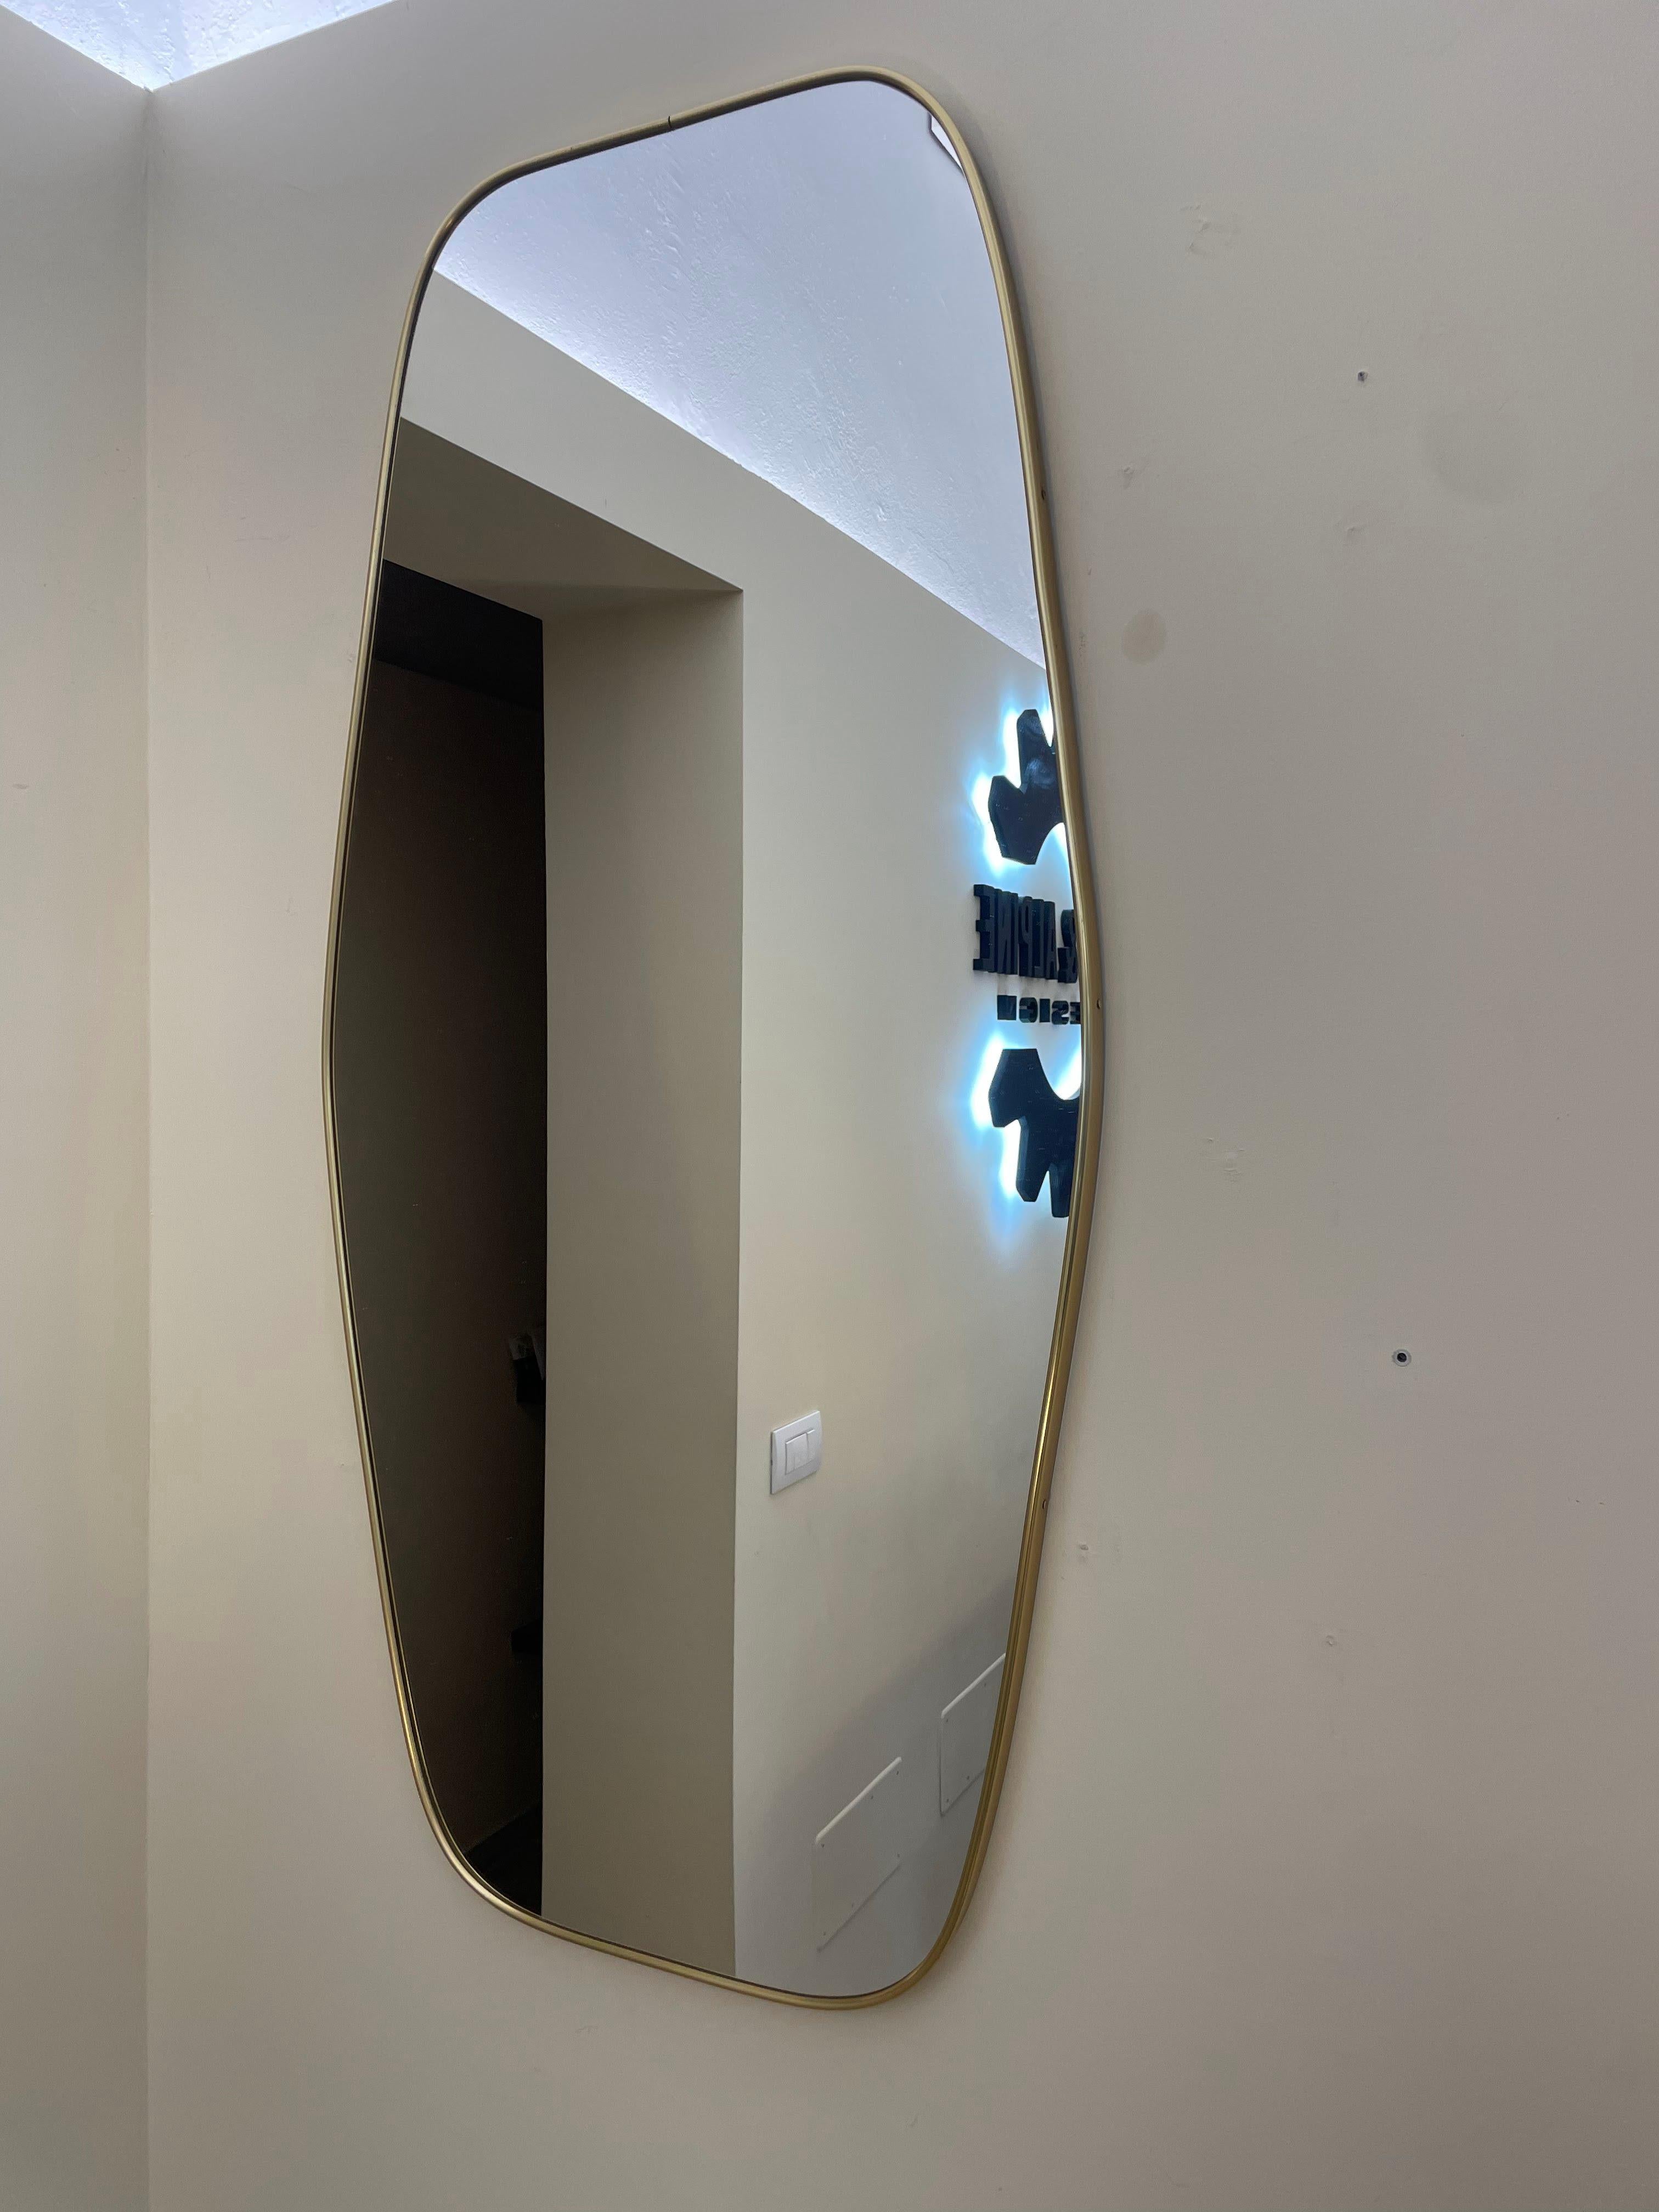 Large wall mirror from the 1950s-60s of Italian manufacture with anodized aluminum frame.